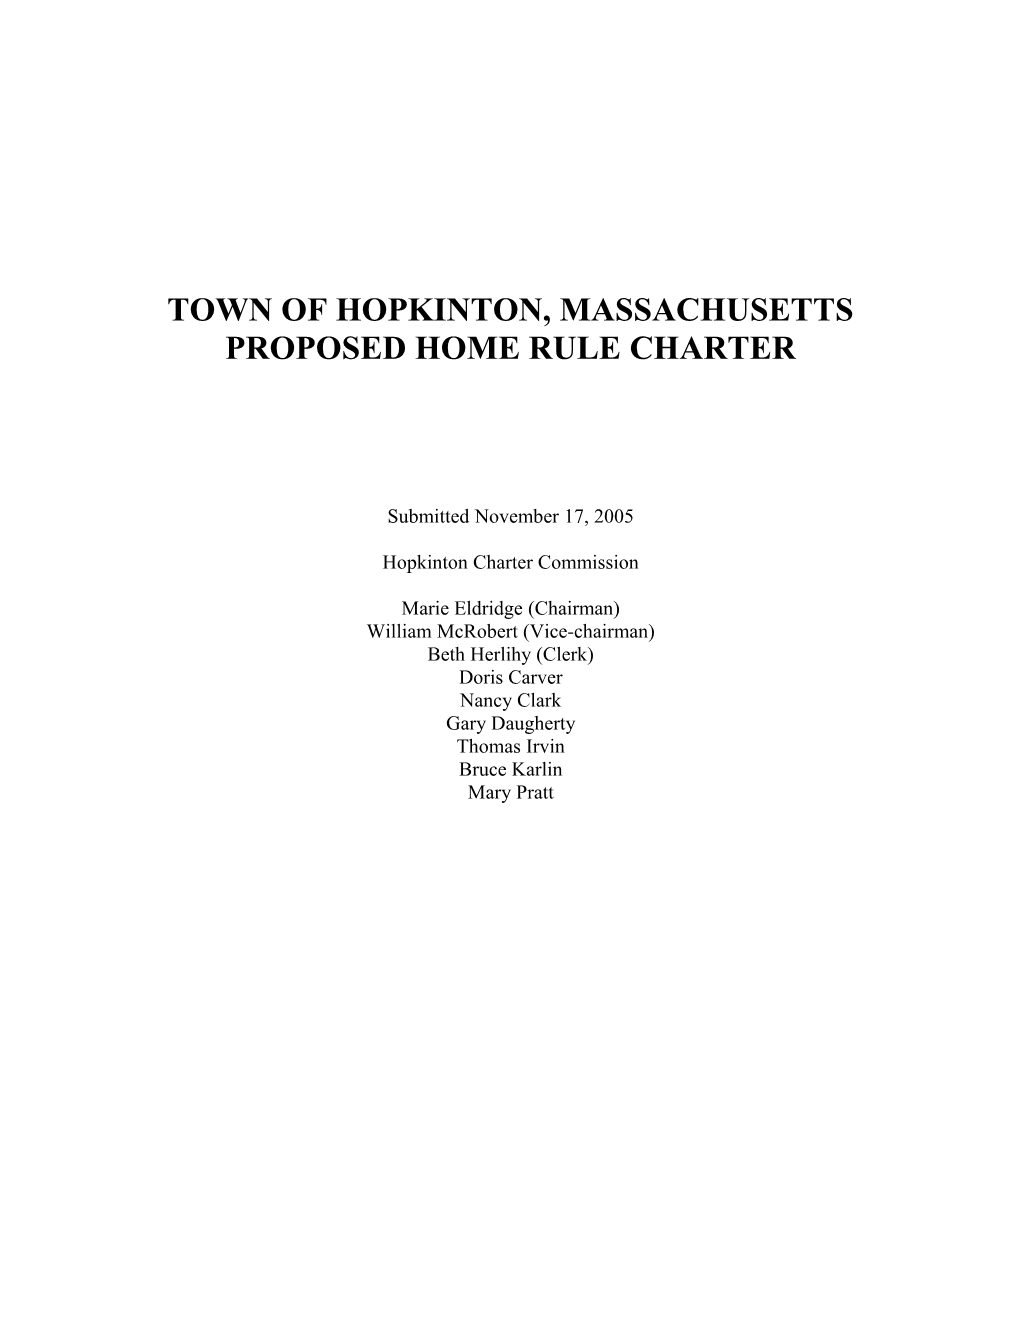 Preliminary Home Rule Charter